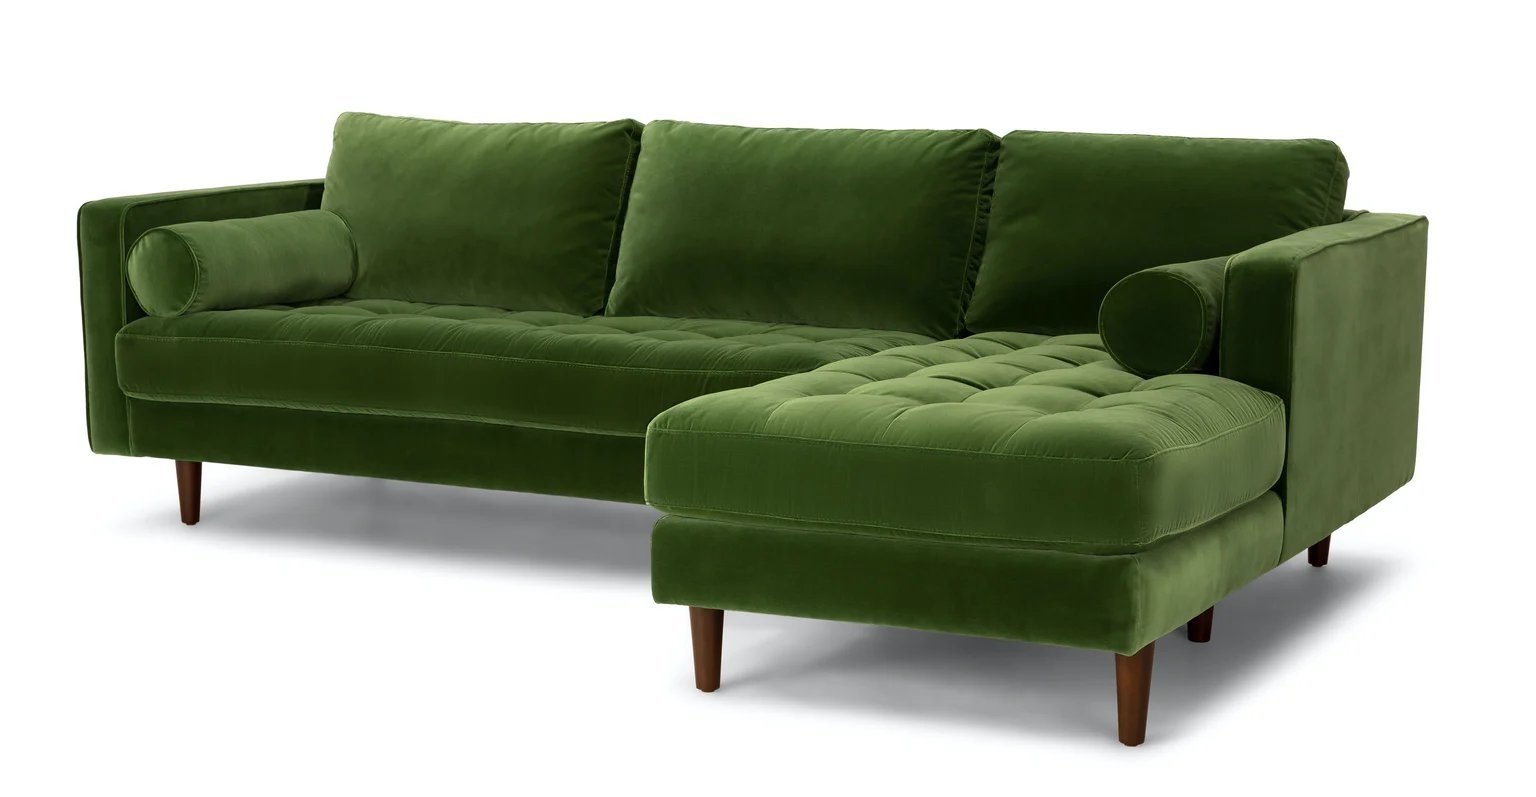 Sven Right Sectional Sofa, Grass Green - Image 5